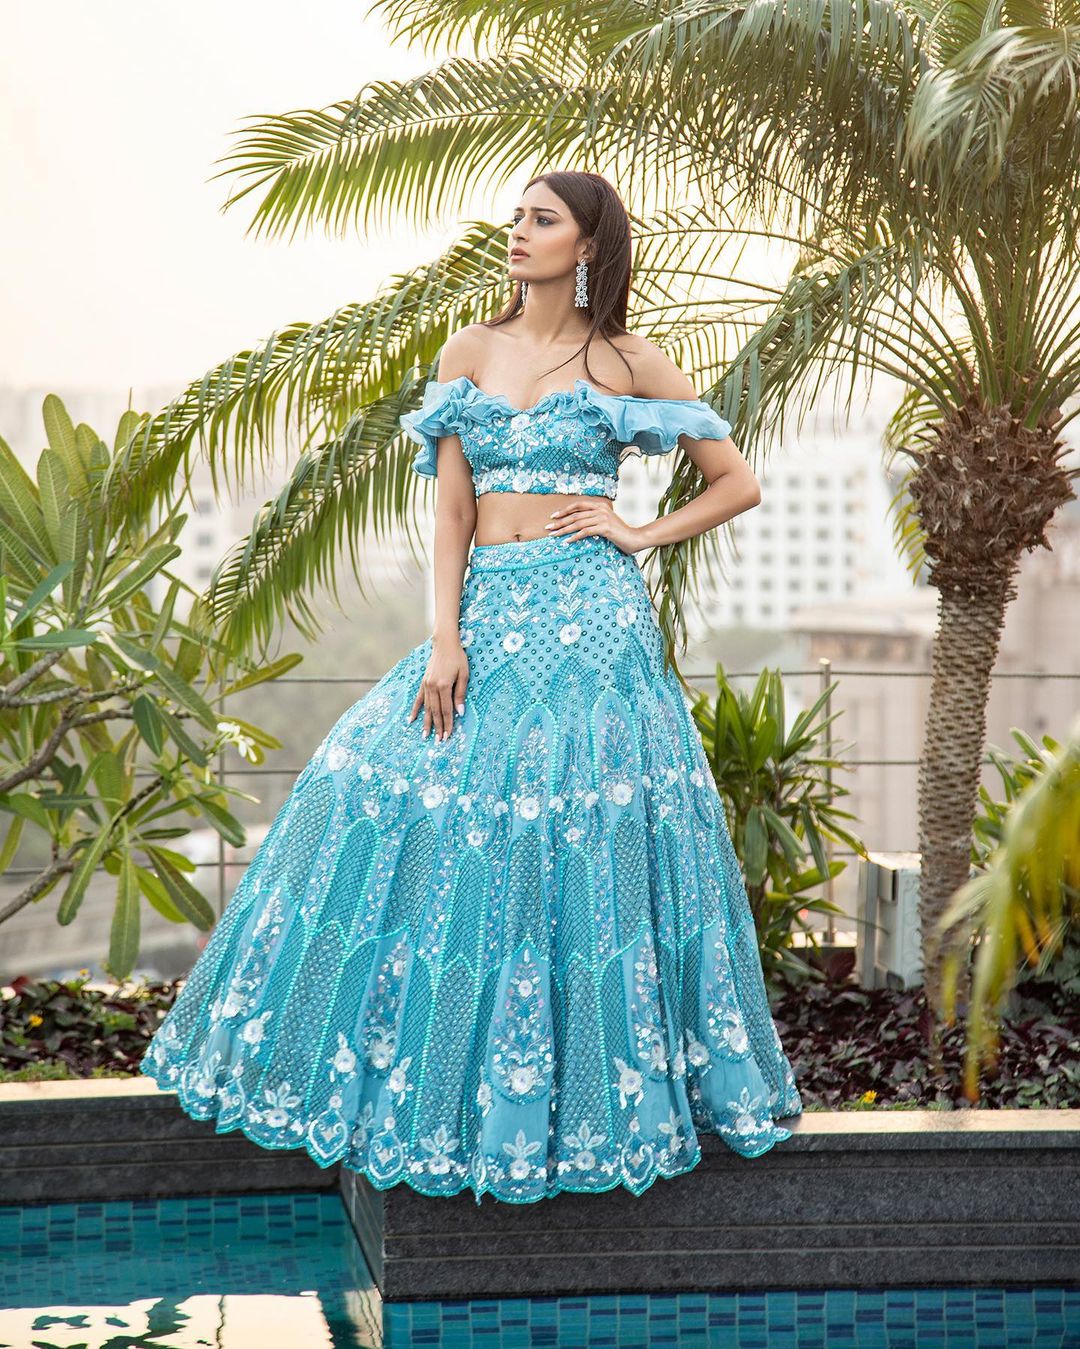 Erica Fernandes is a sight to behold in the blue lehenga